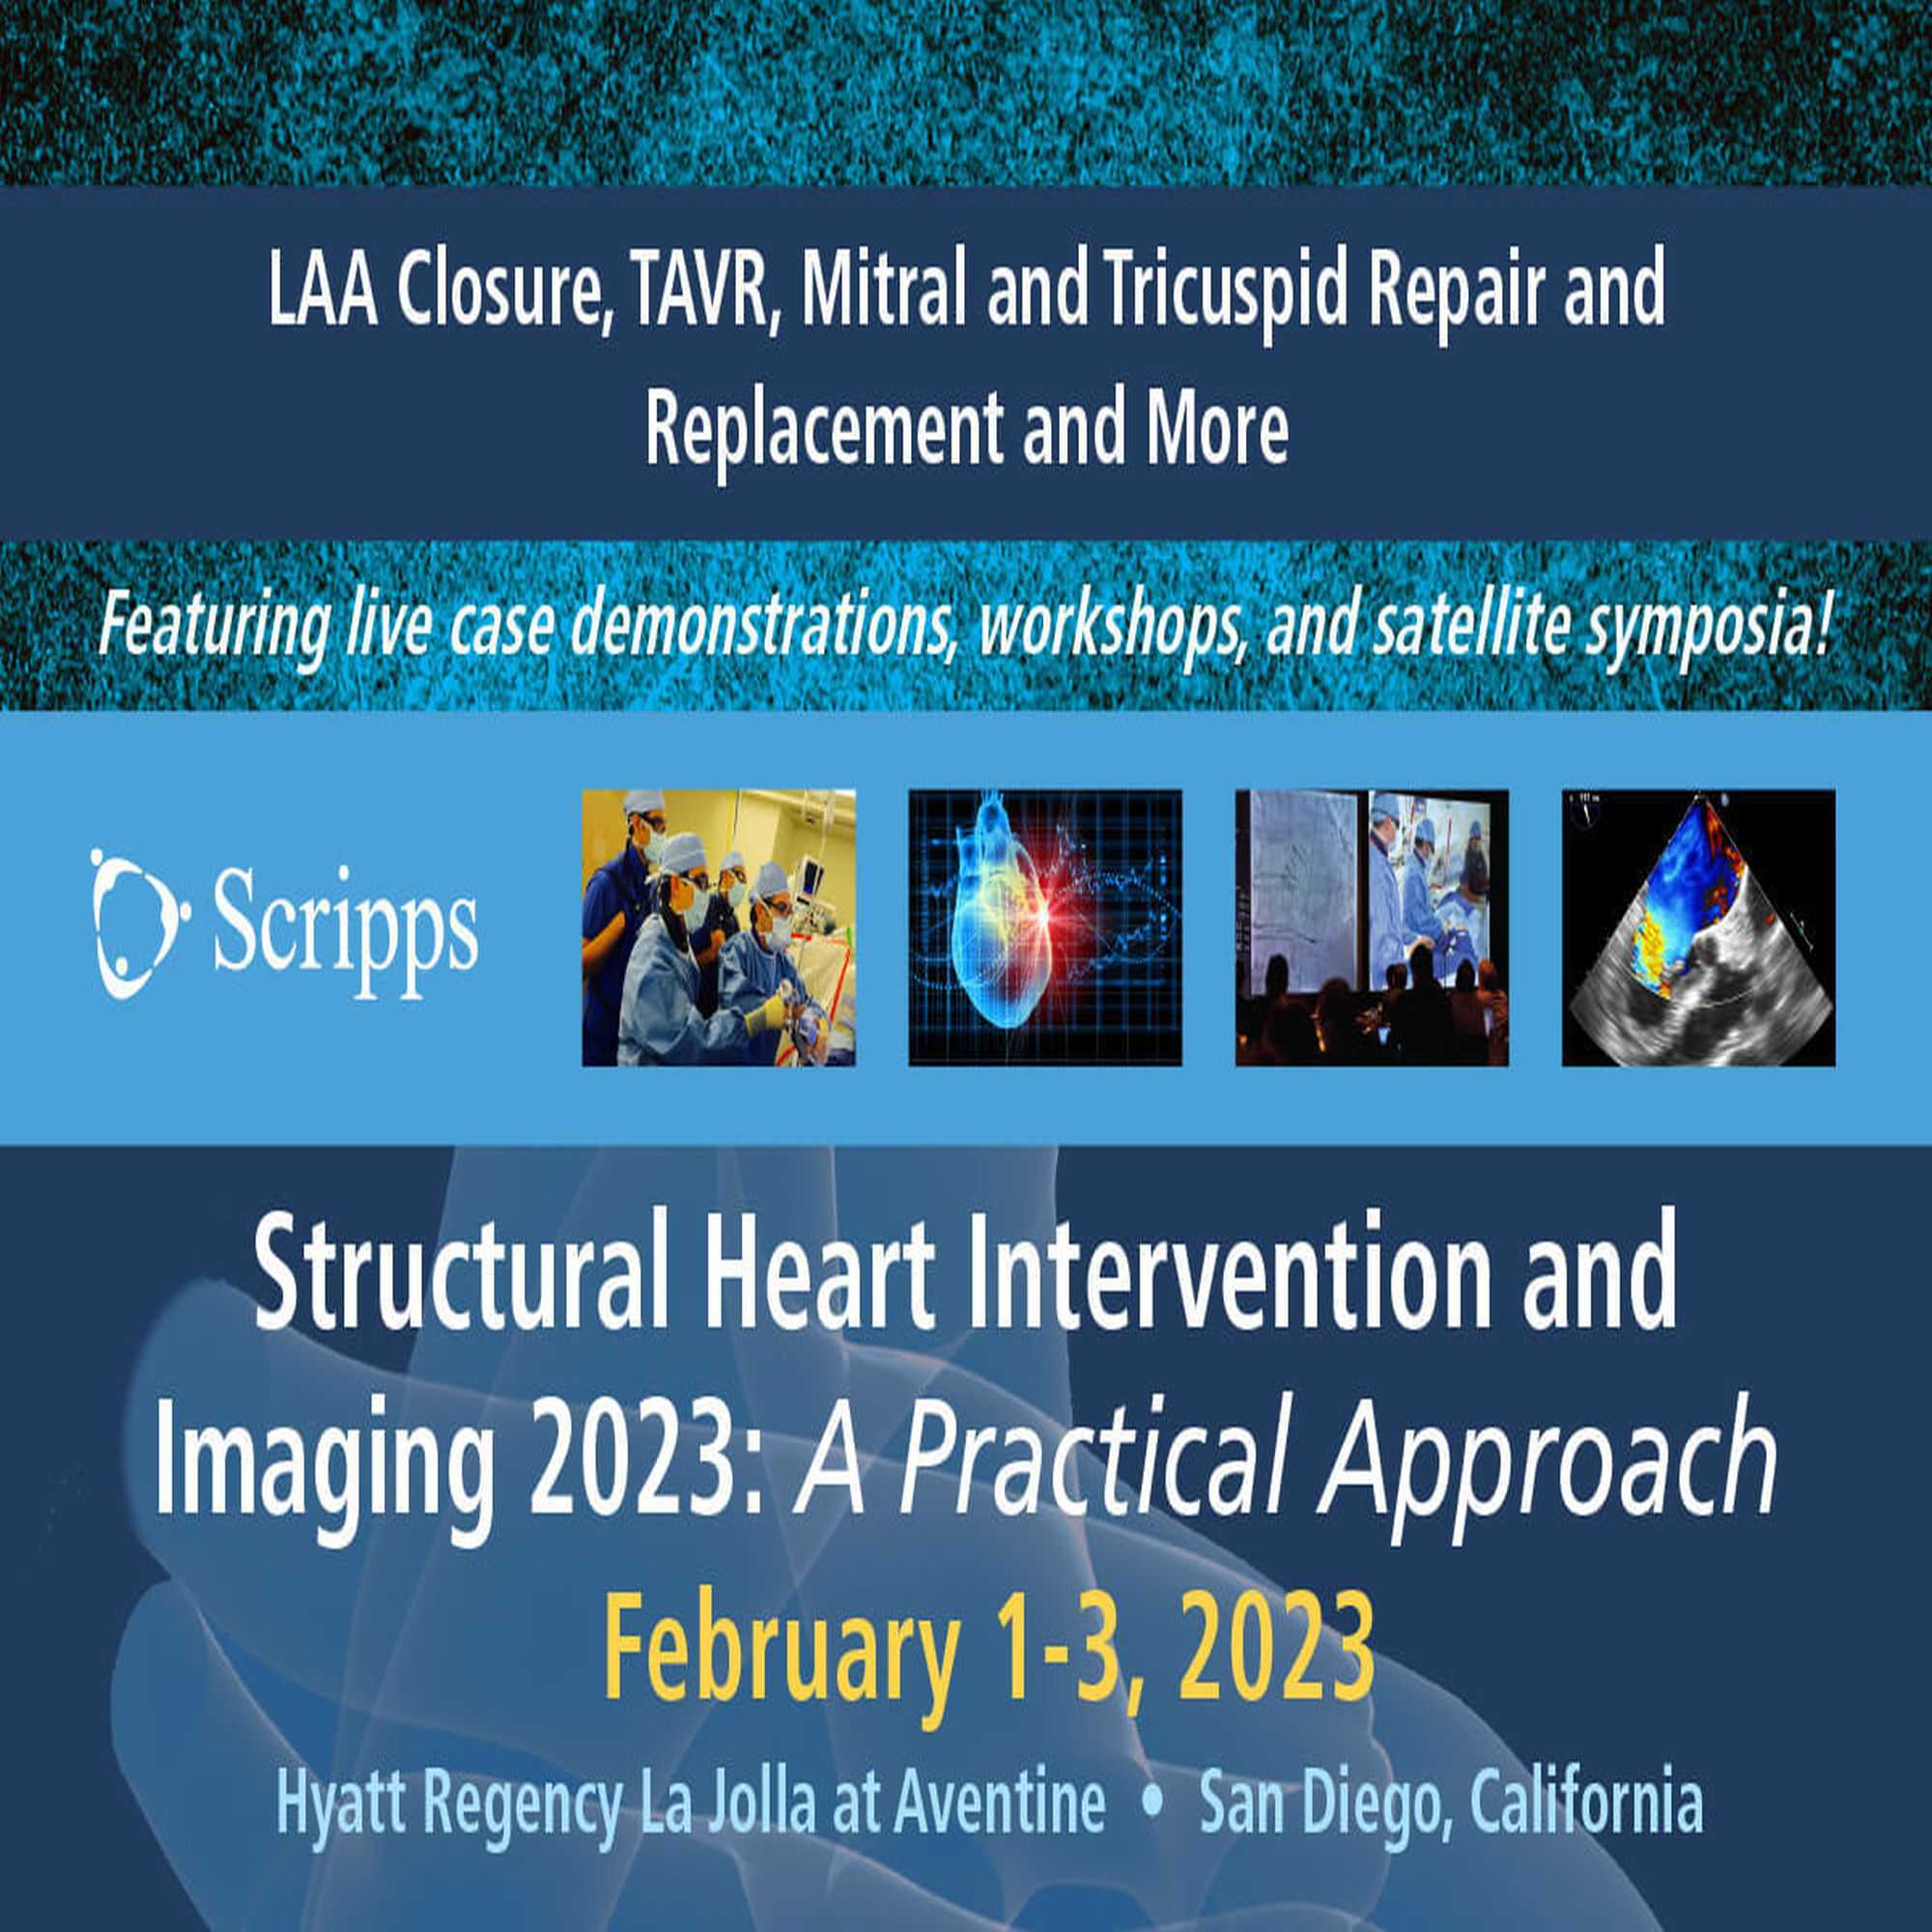 Scripps Structural Heart Intervention and Imaging 2023 CME Conference - San Diego, California